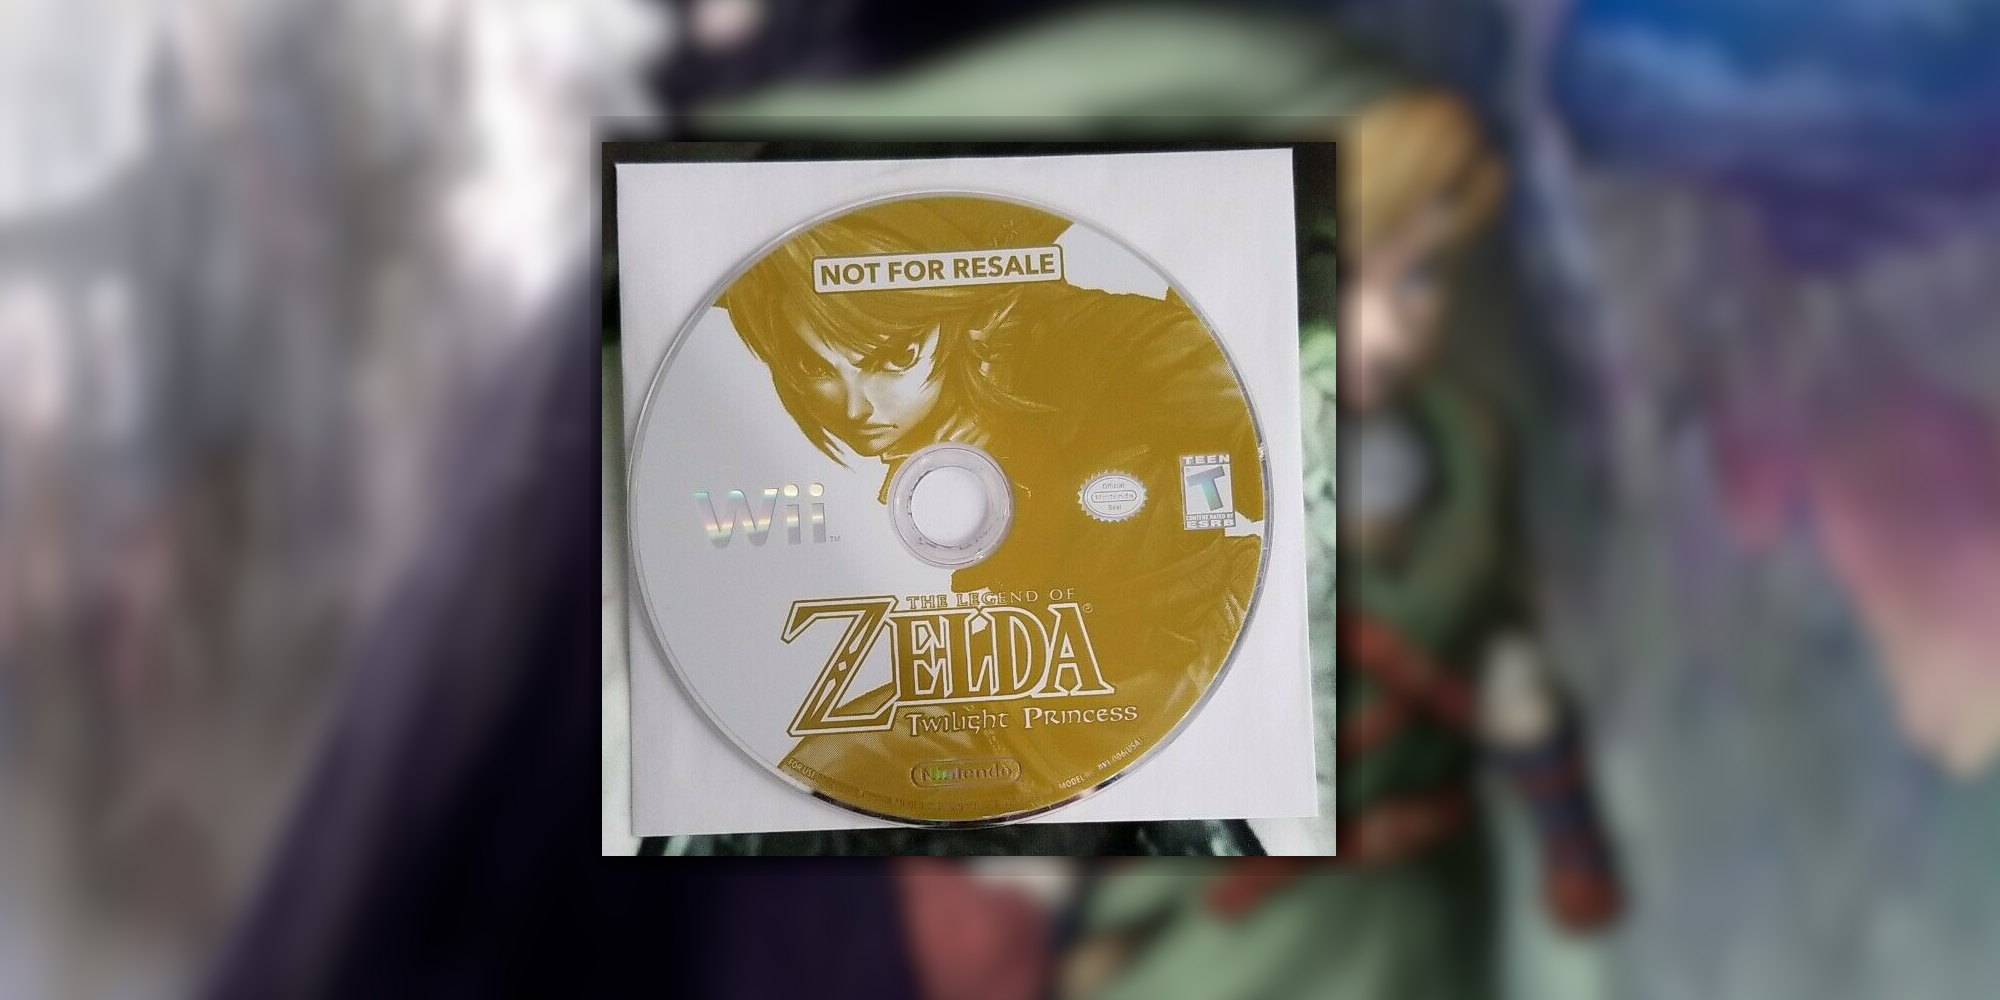 Not for Resale Big-Box Twilight Princess Wii Disk